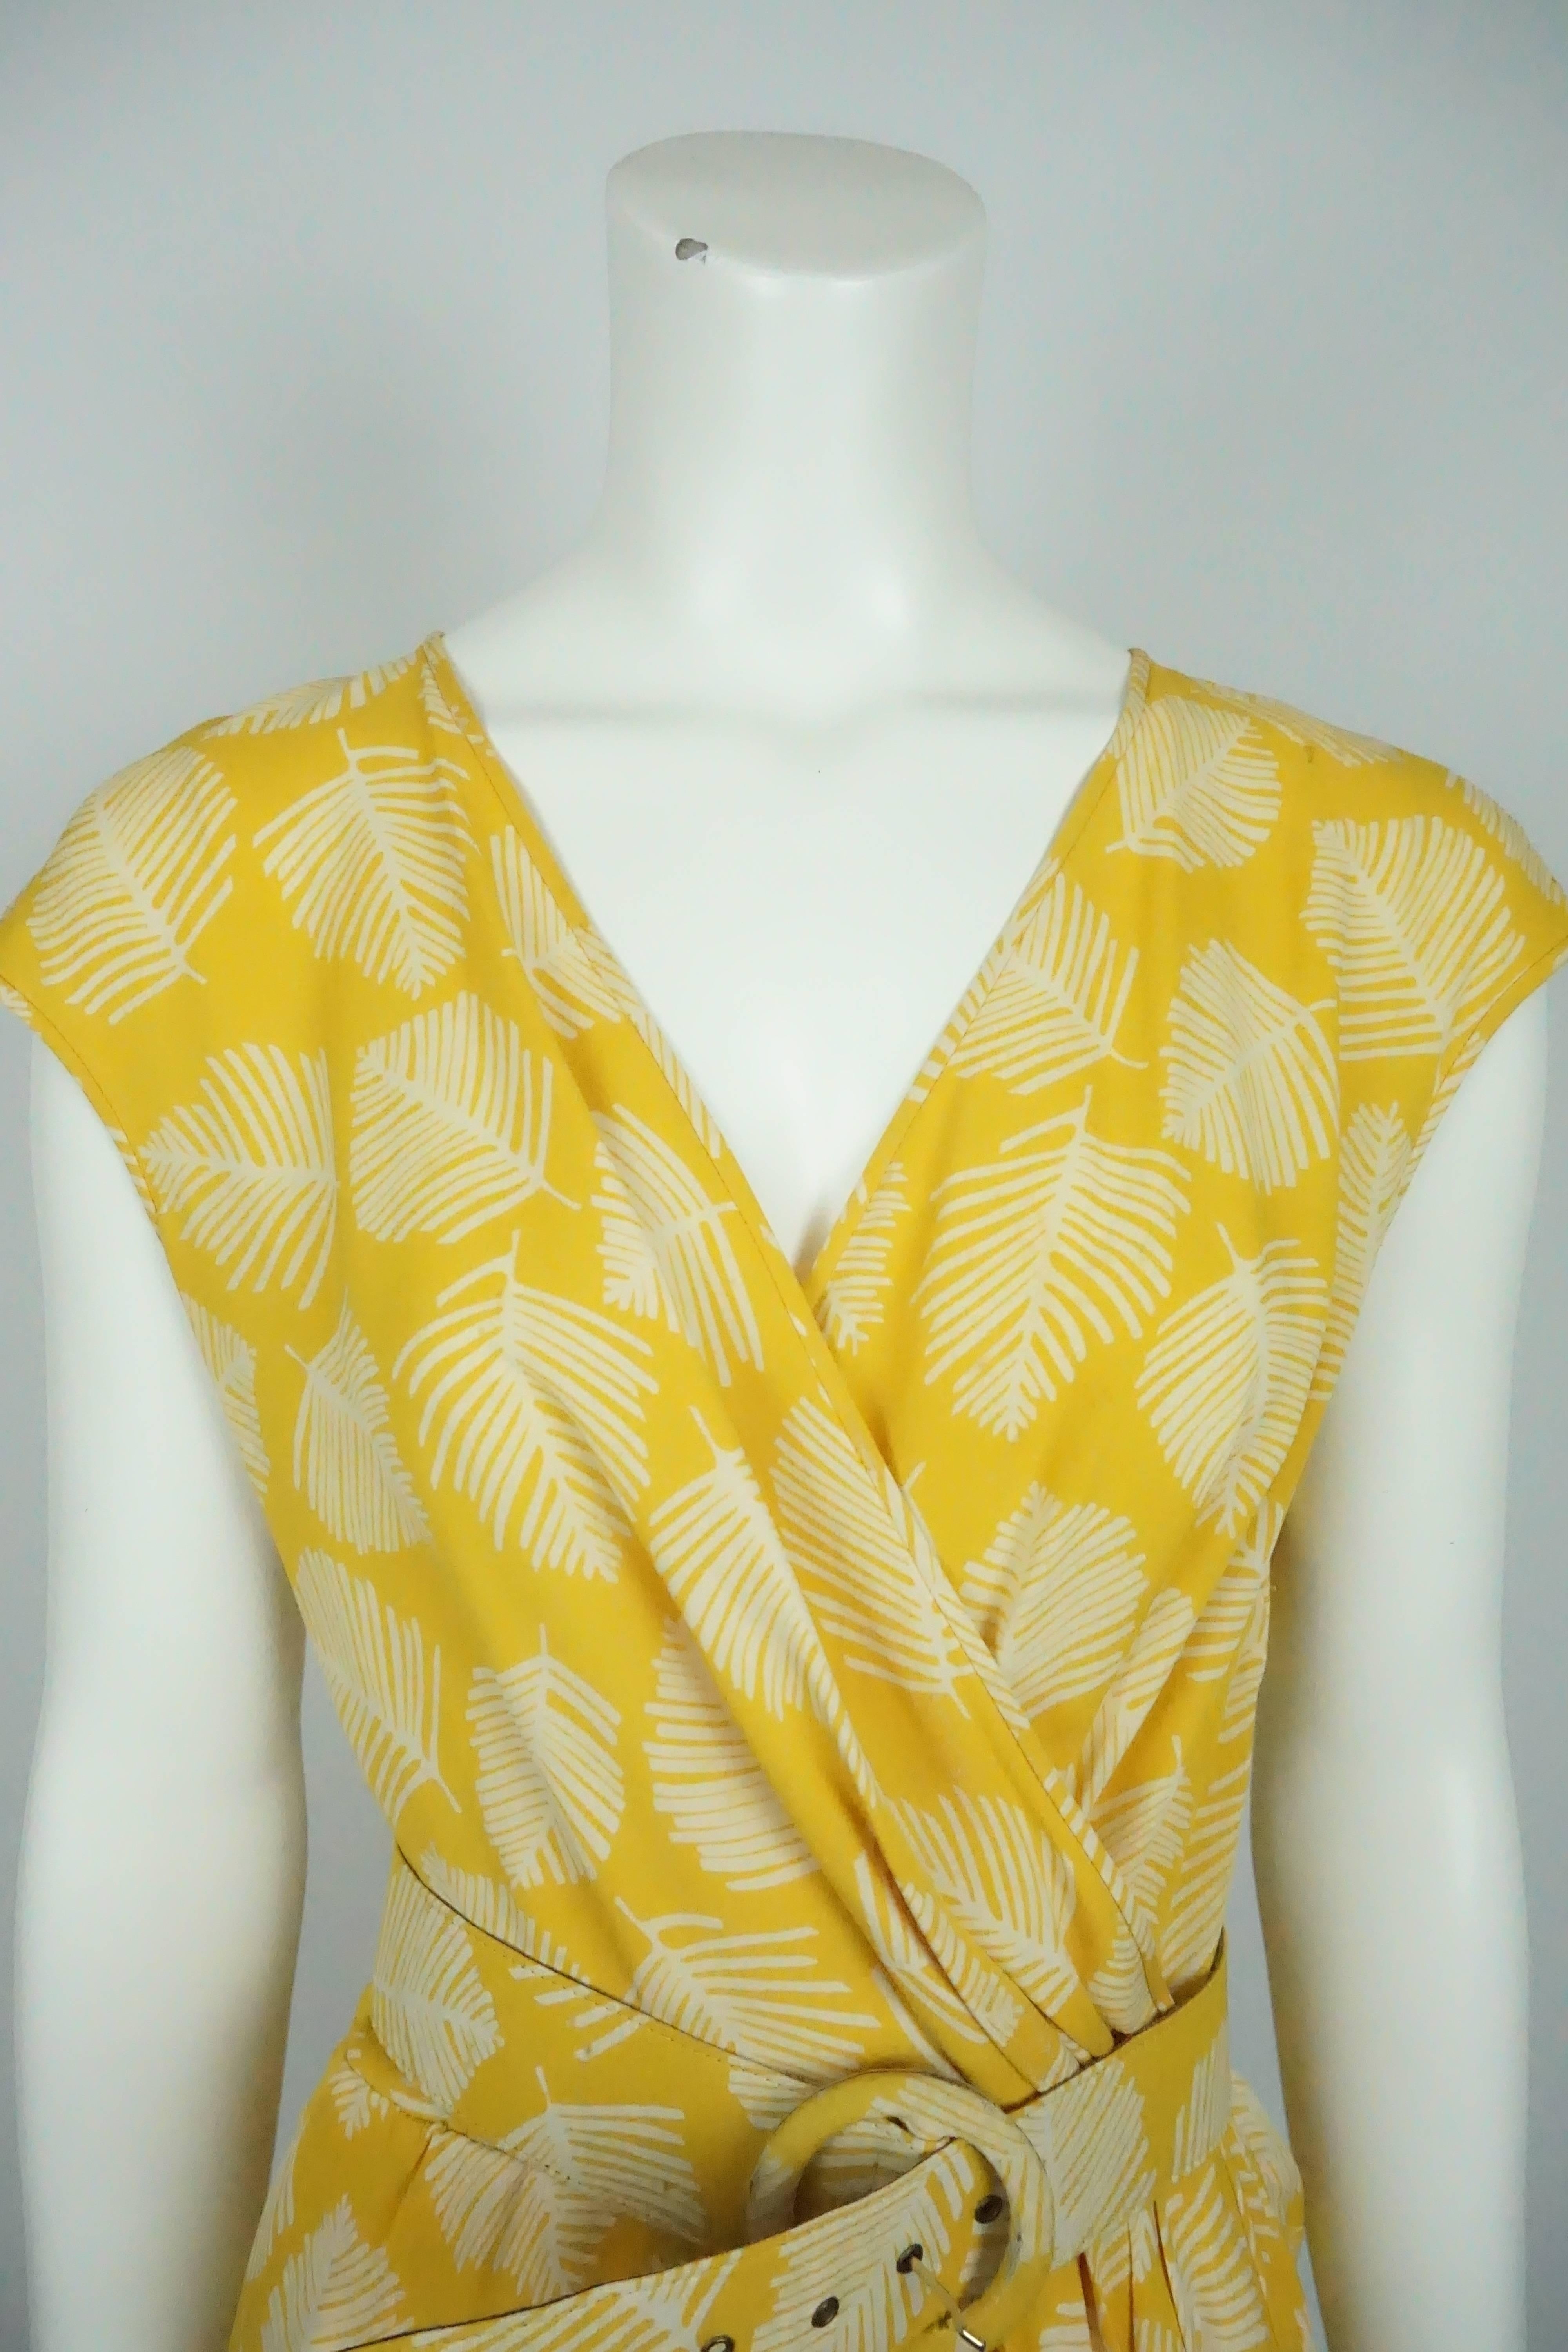 Valentino Yellow & White Cap Sleeve w/ Leaf Print - 8 For Sale 2